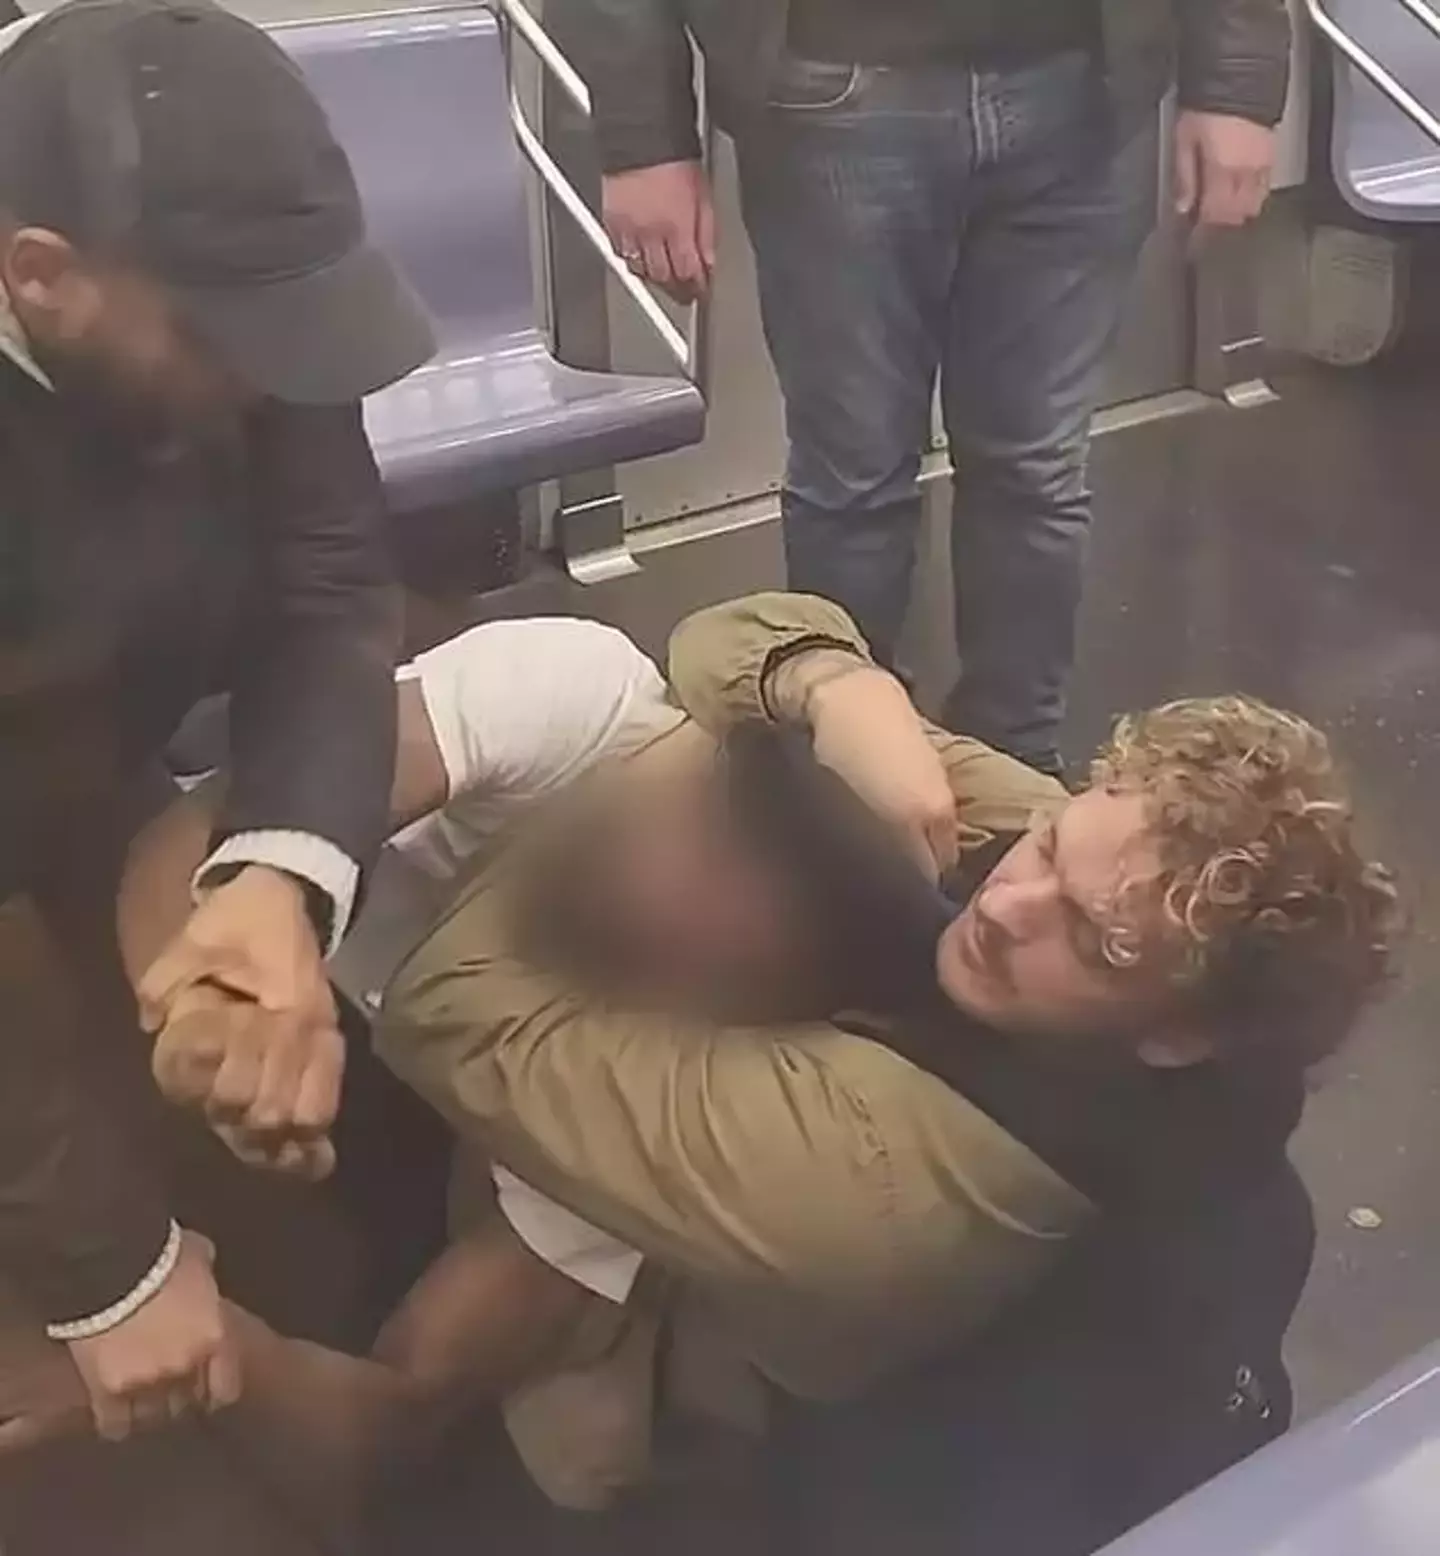 Footage from the train showed Daniel Penny having Jordan Neely in a chokehold for minutes.